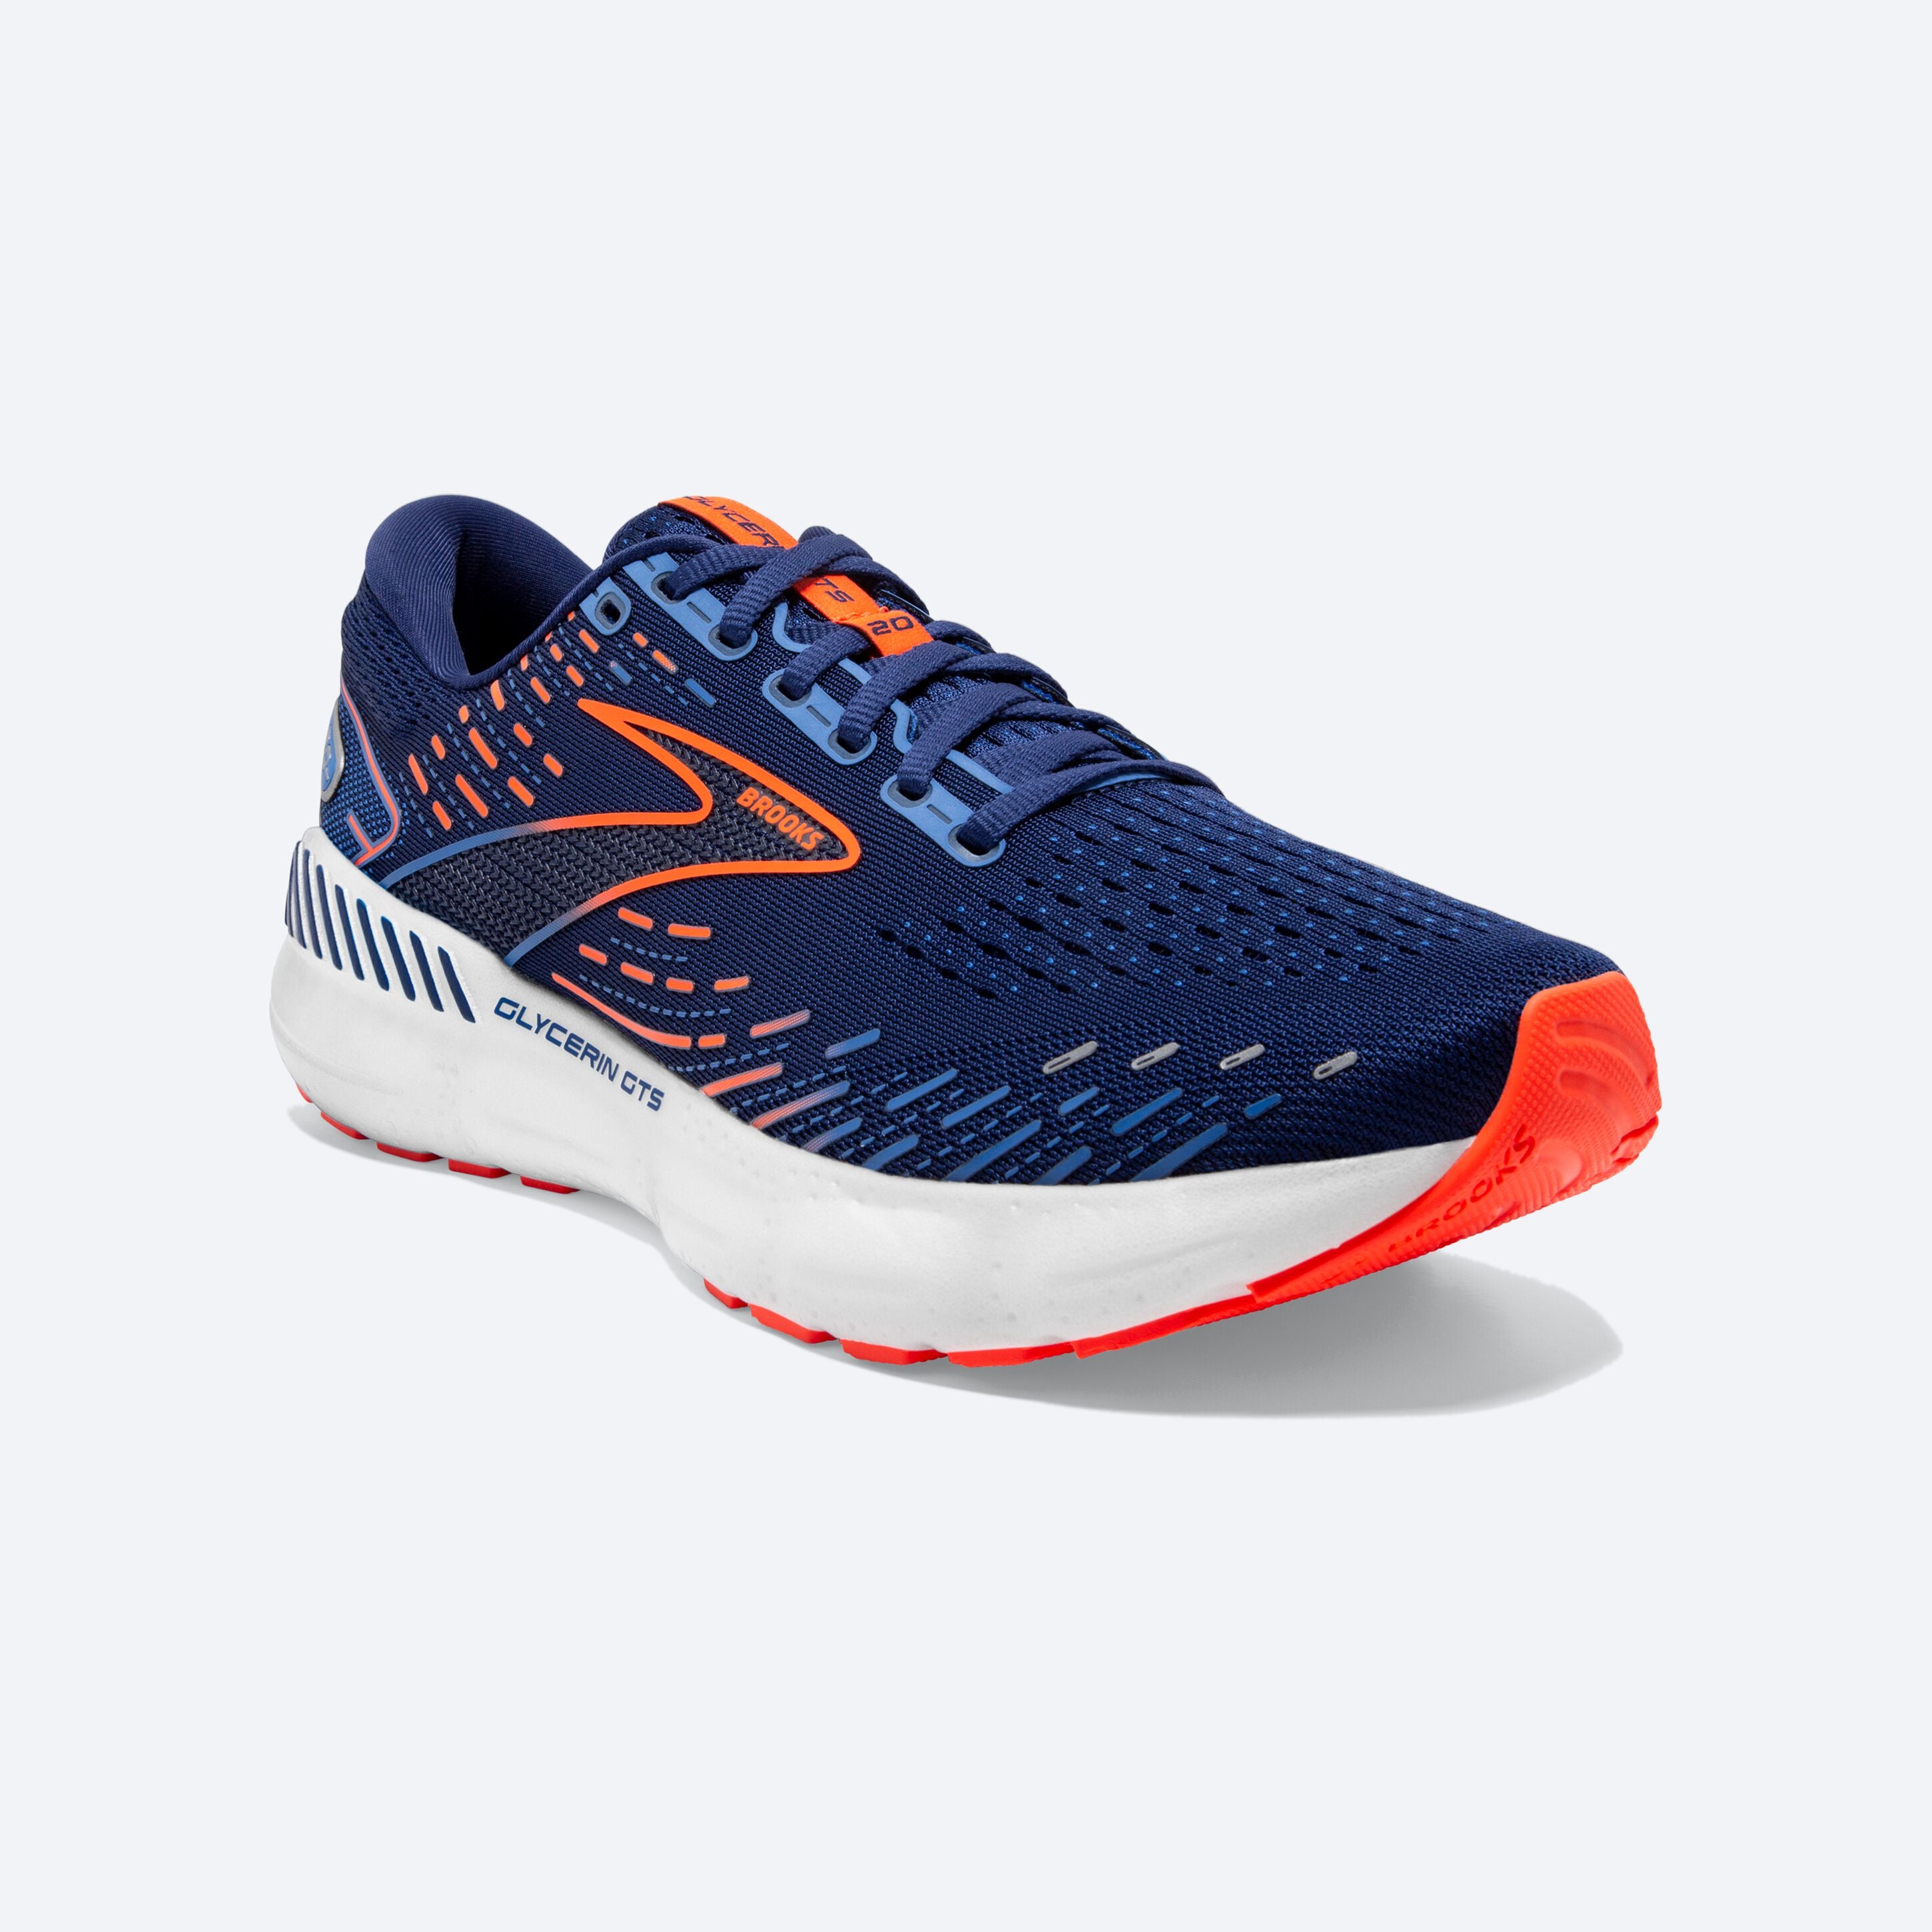 Front angle view of the Men's Glycerin GTS 20 in the wide 2E width, color Blue depths/Palace blue/Orange